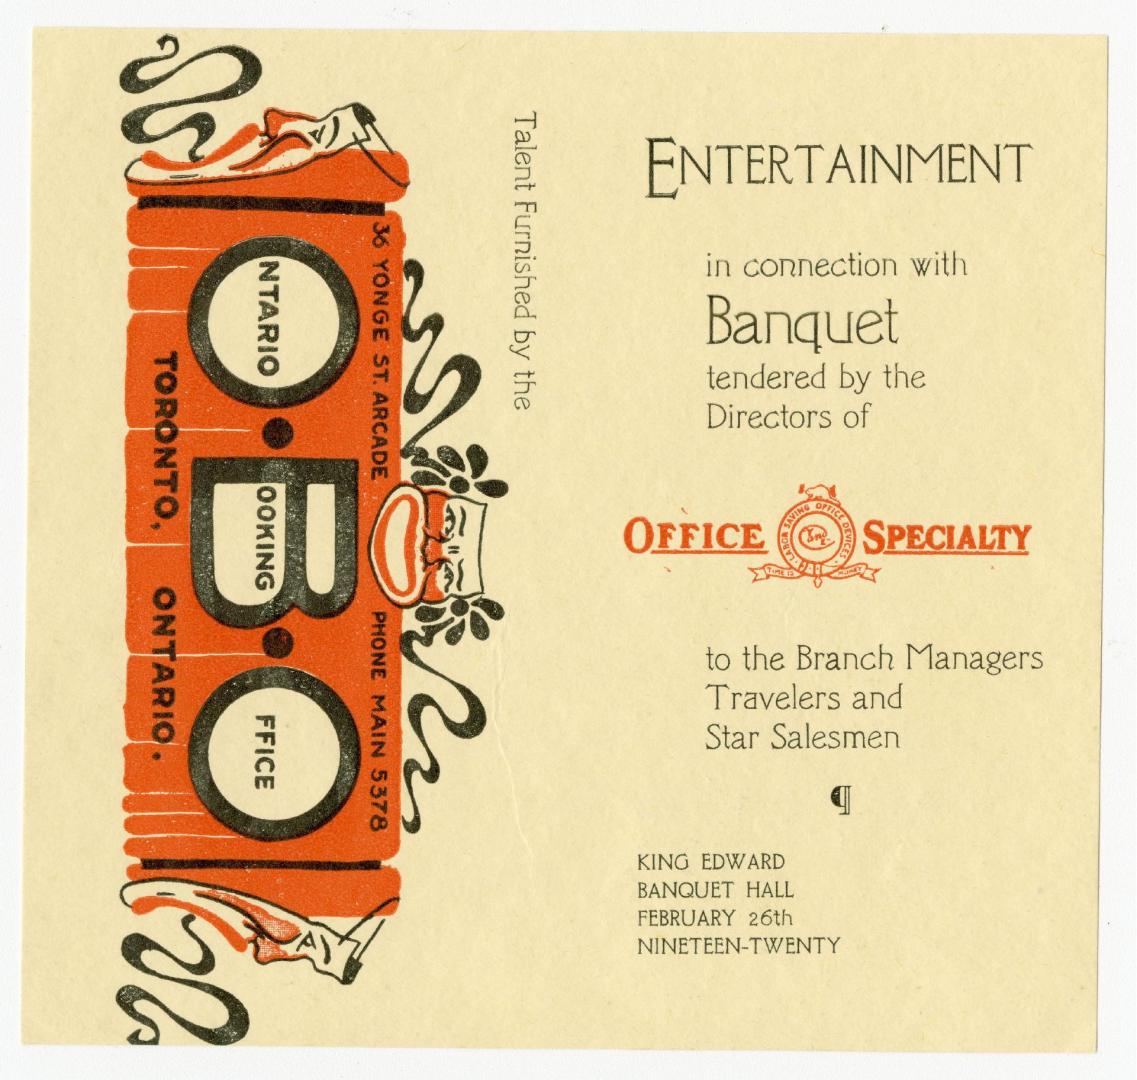 Entertainment in connection with banquet tendered by the directors of Office Specialty